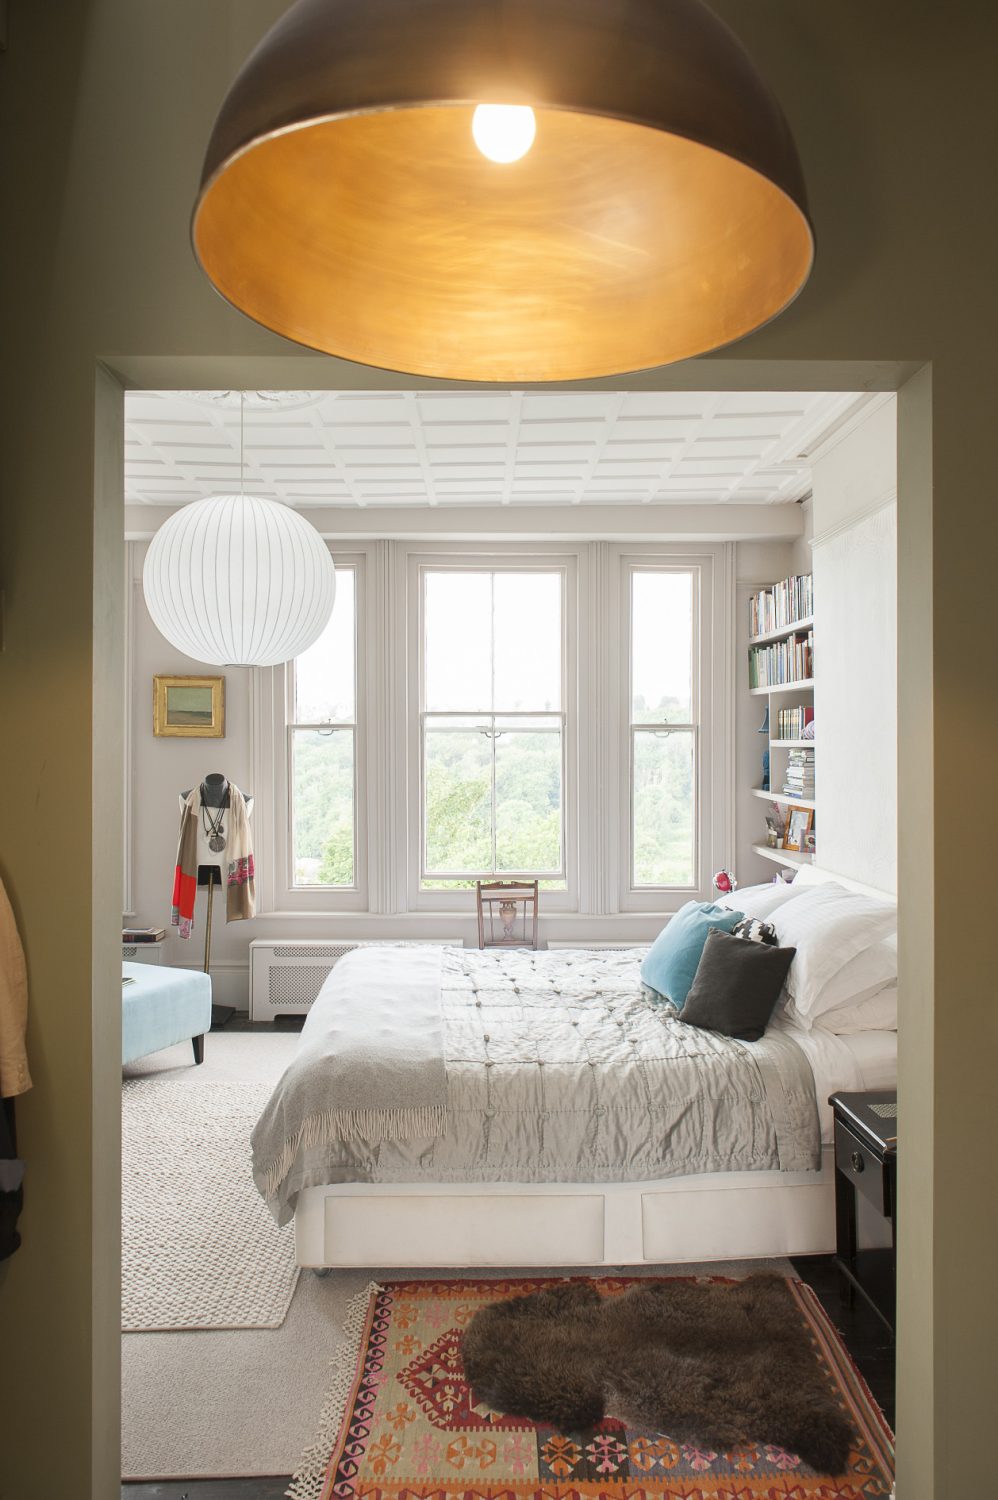 The pale grey bedroom is linked to the bathroom by an olive green dressing room. The striking copper light fitting is by Jim Lawrence. The seascape on the far wall is by Anne Packard. The white and steel pendant light is one of a number of George Nelson classic lights throughout the house